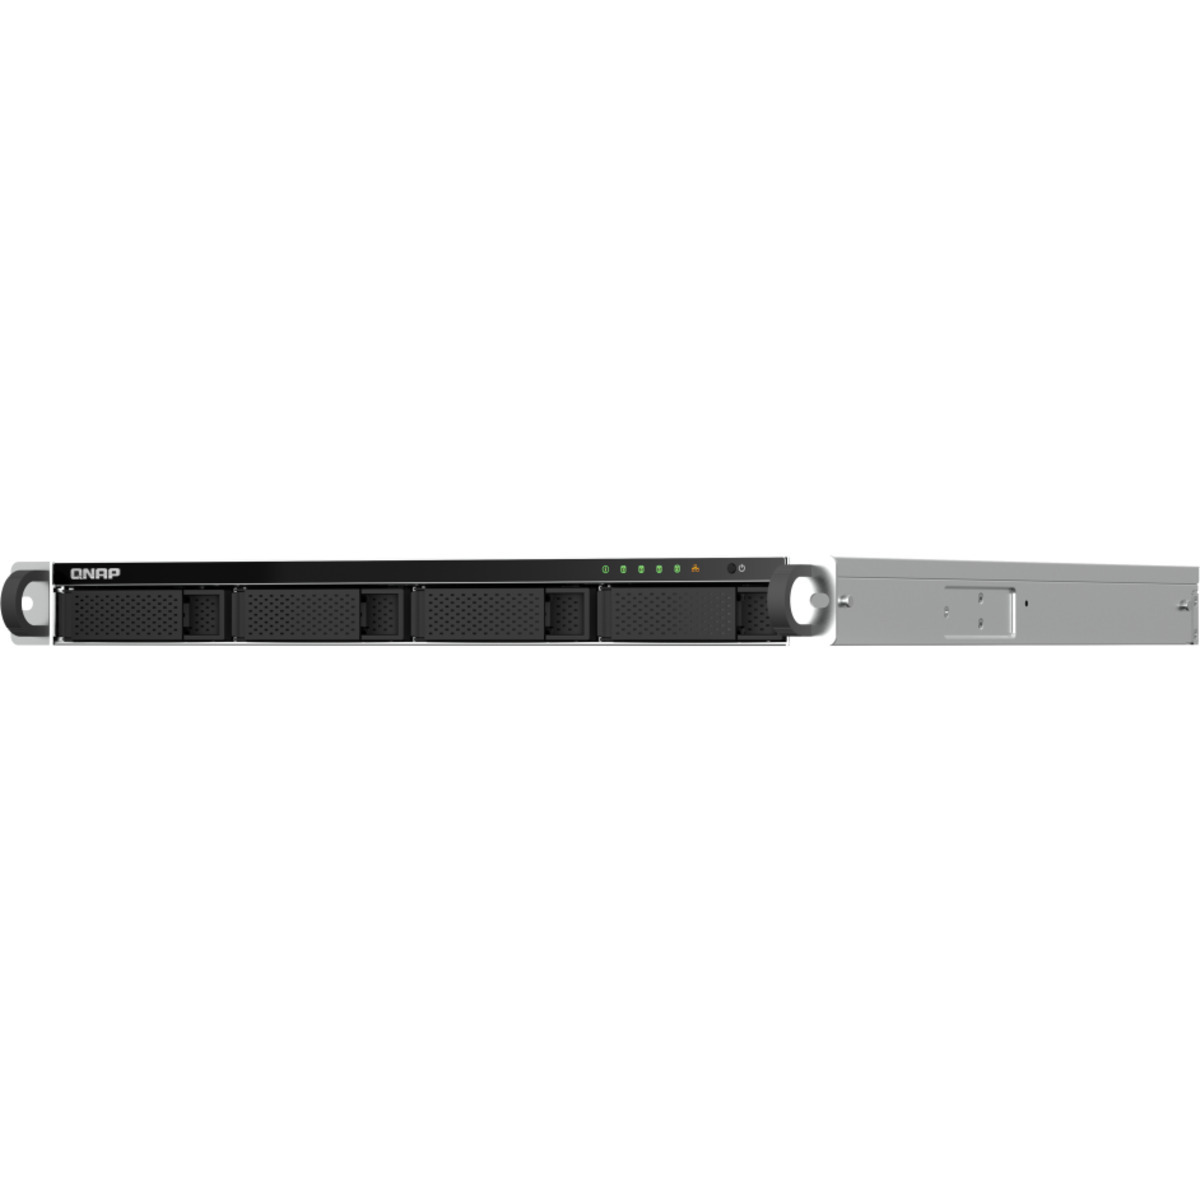 buy QNAP TS-464U 16tb RackMount NAS - Network Attached Storage Device 4x4000gb Seagate BarraCuda ST4000DM004 3.5 7200rpm SATA 6Gb/s HDD CONSUMER Class Drives Installed - Burn-In Tested - nas headquarters buy network attached storage server device das new raid-5 free shipping simply usa TS-464U